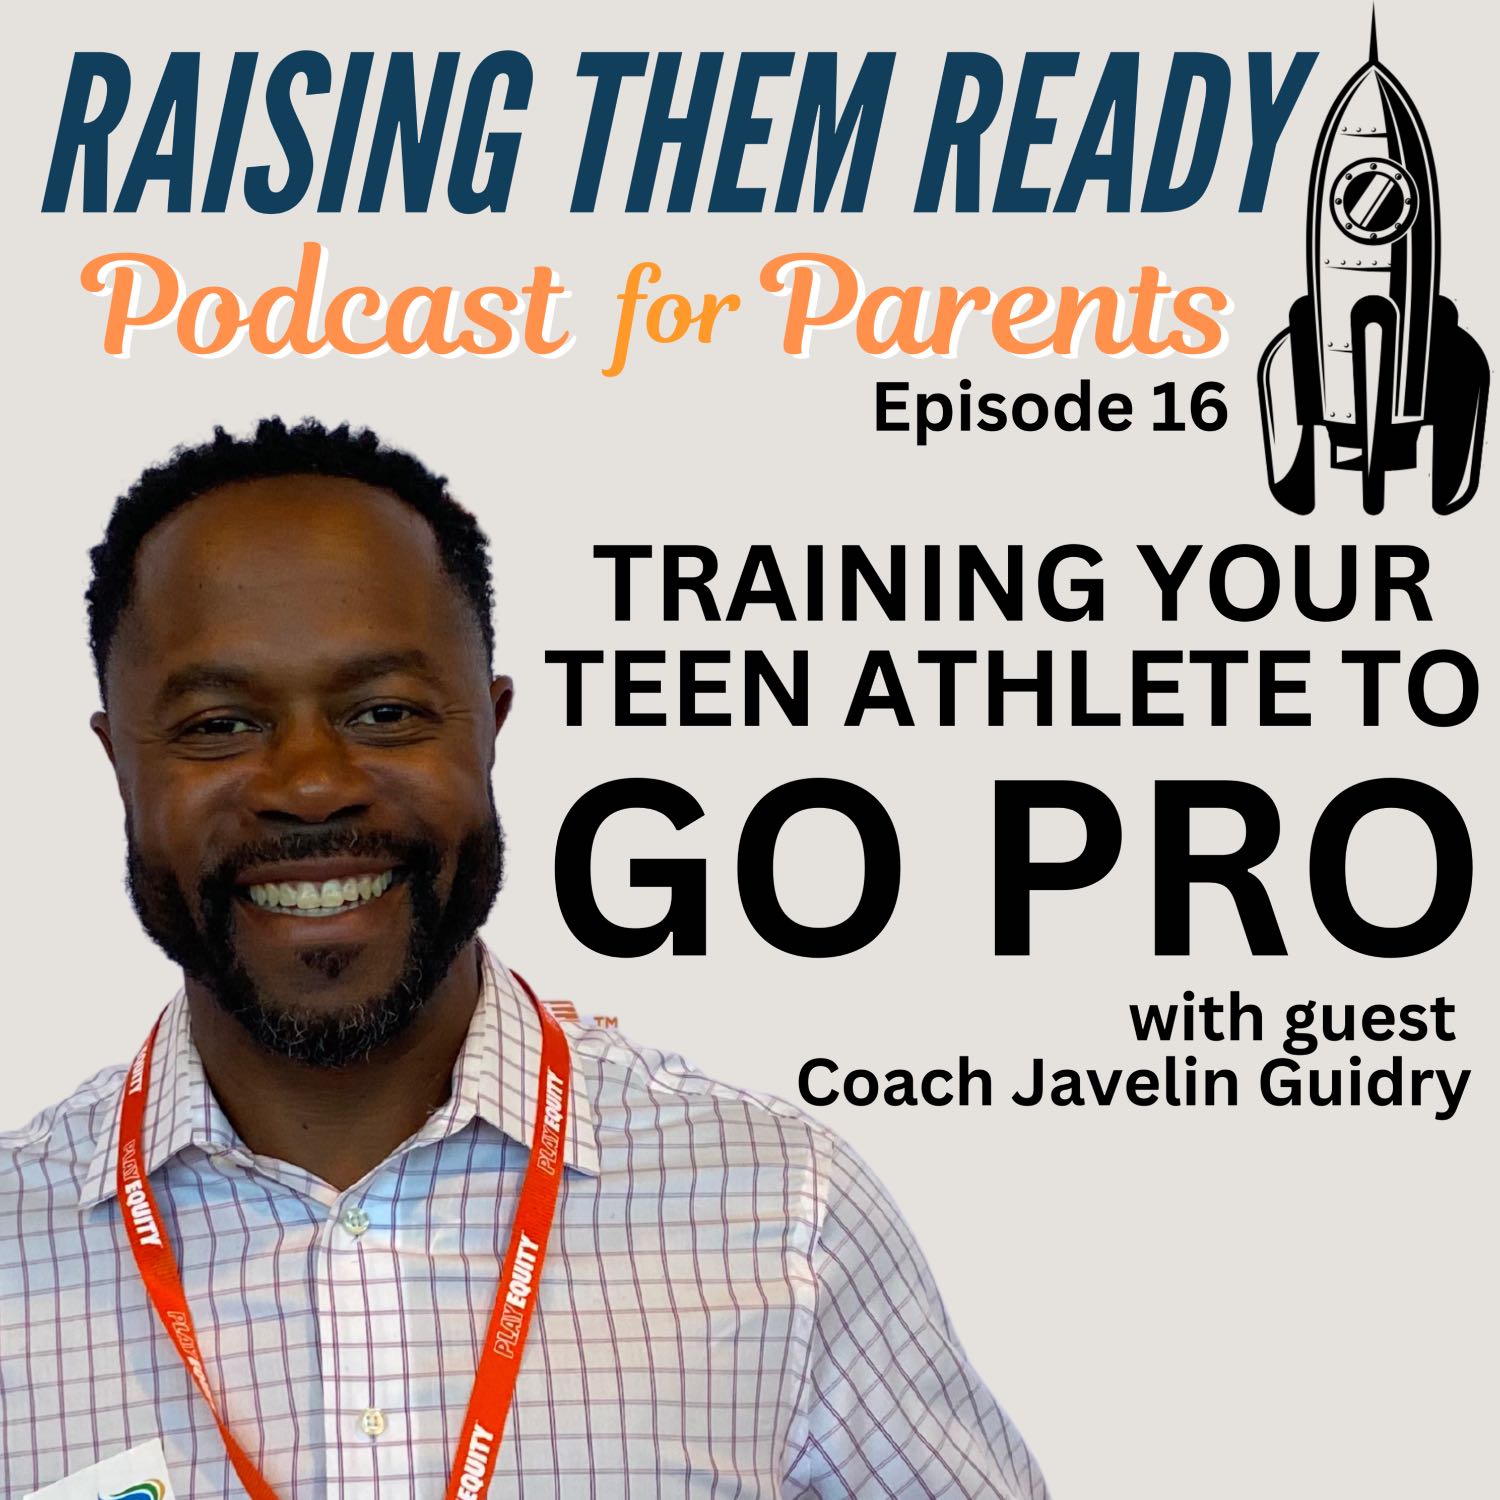 Training Your Teen Athlete to GO PRO, with guest Coach Javelin Guidry